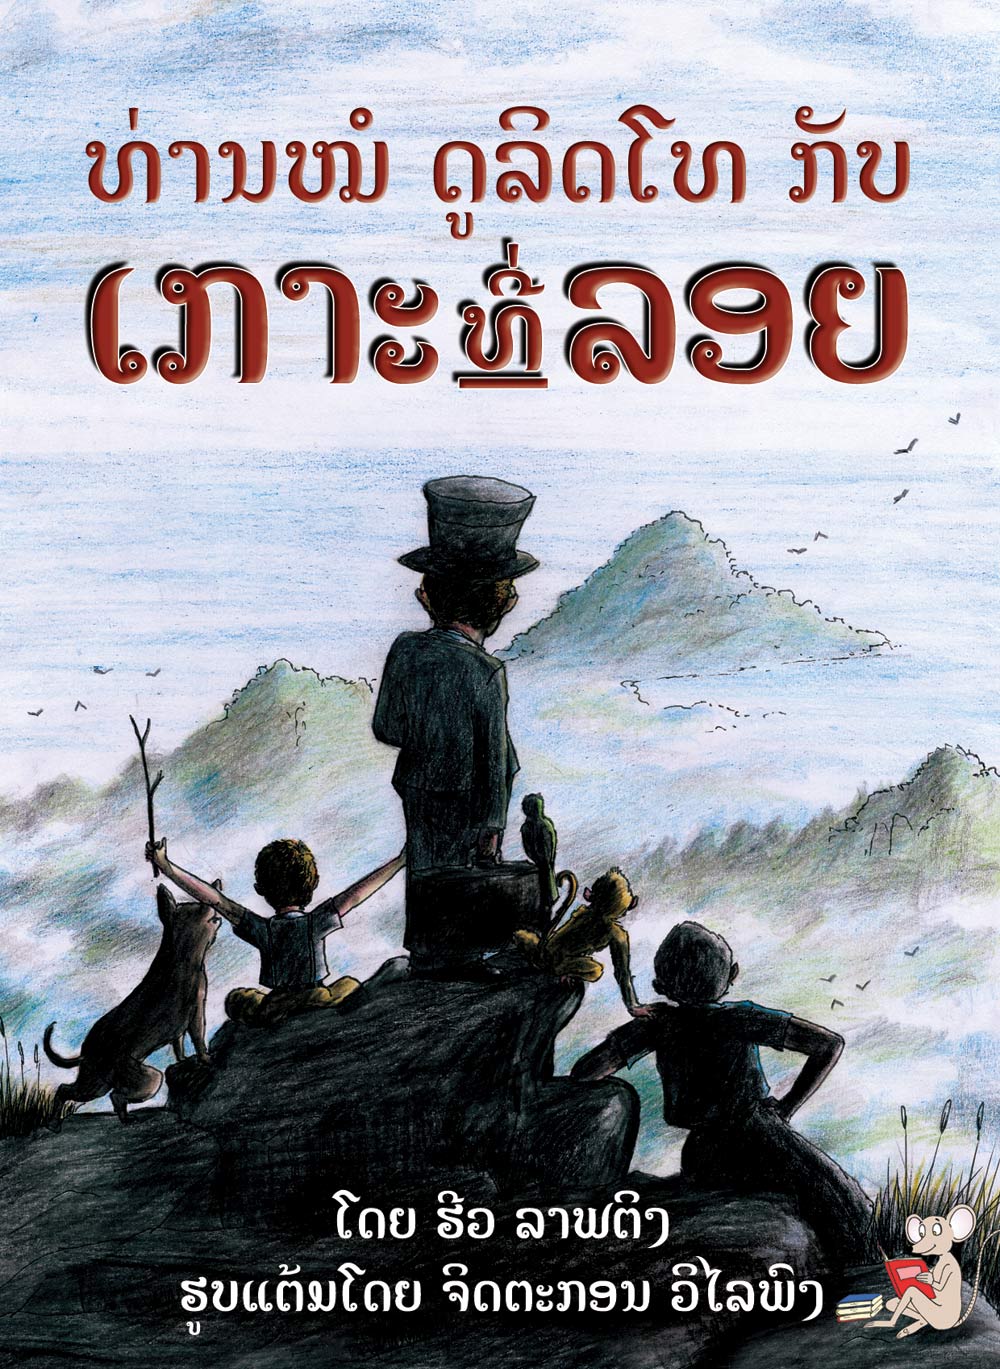 Dr. Dolittle and the Floating Island large book cover, published in Lao language